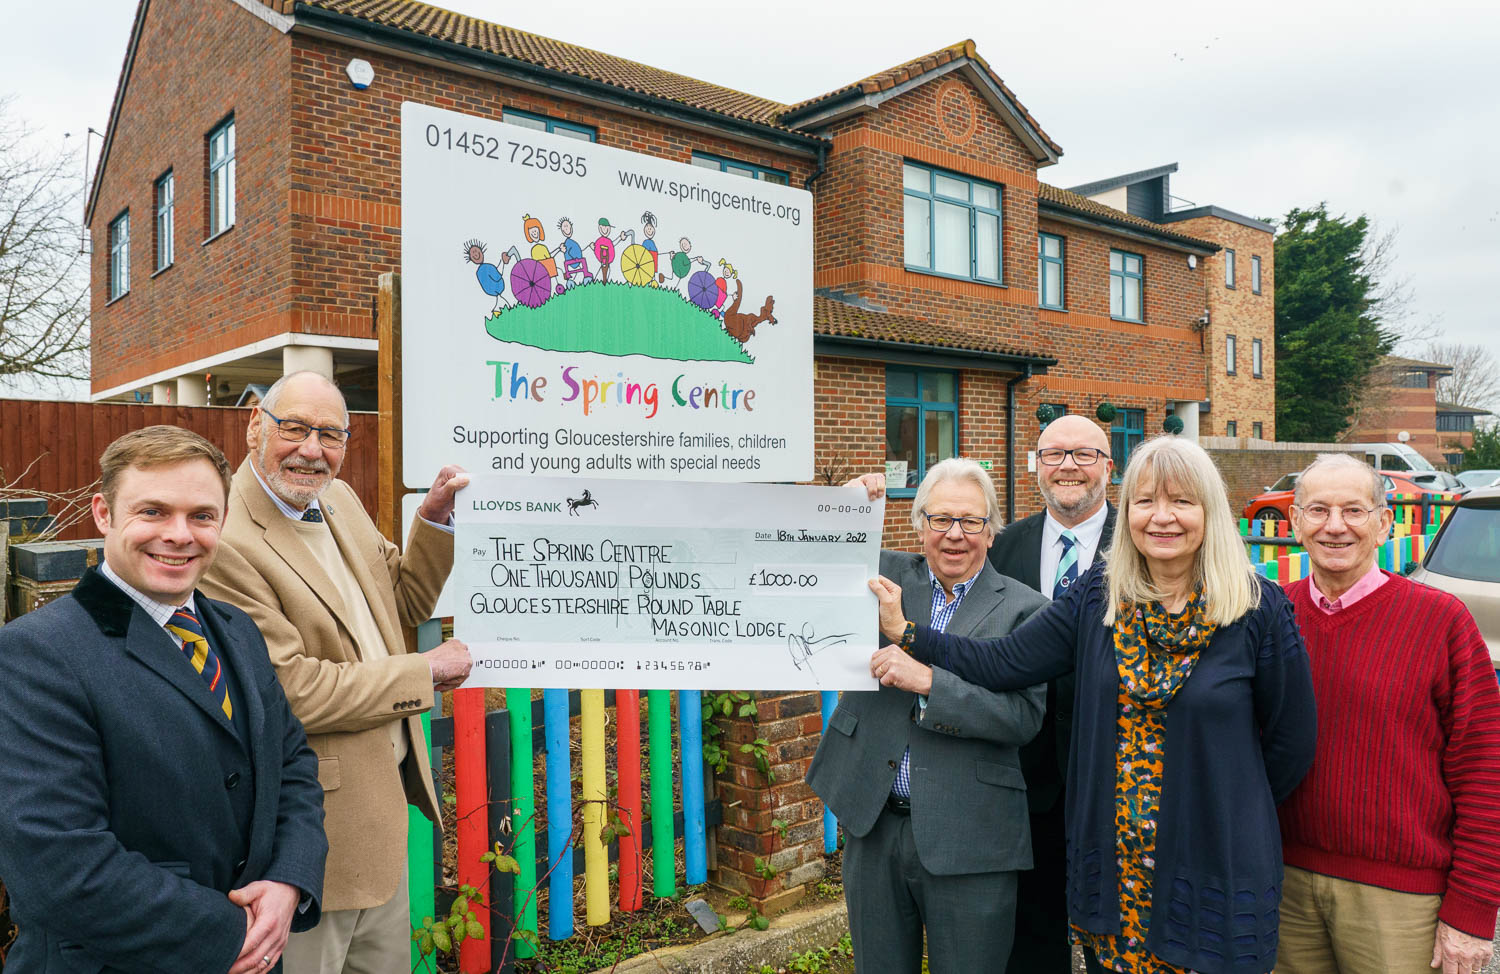 Gloucestershire/England - Grand boost for the Spring Centre